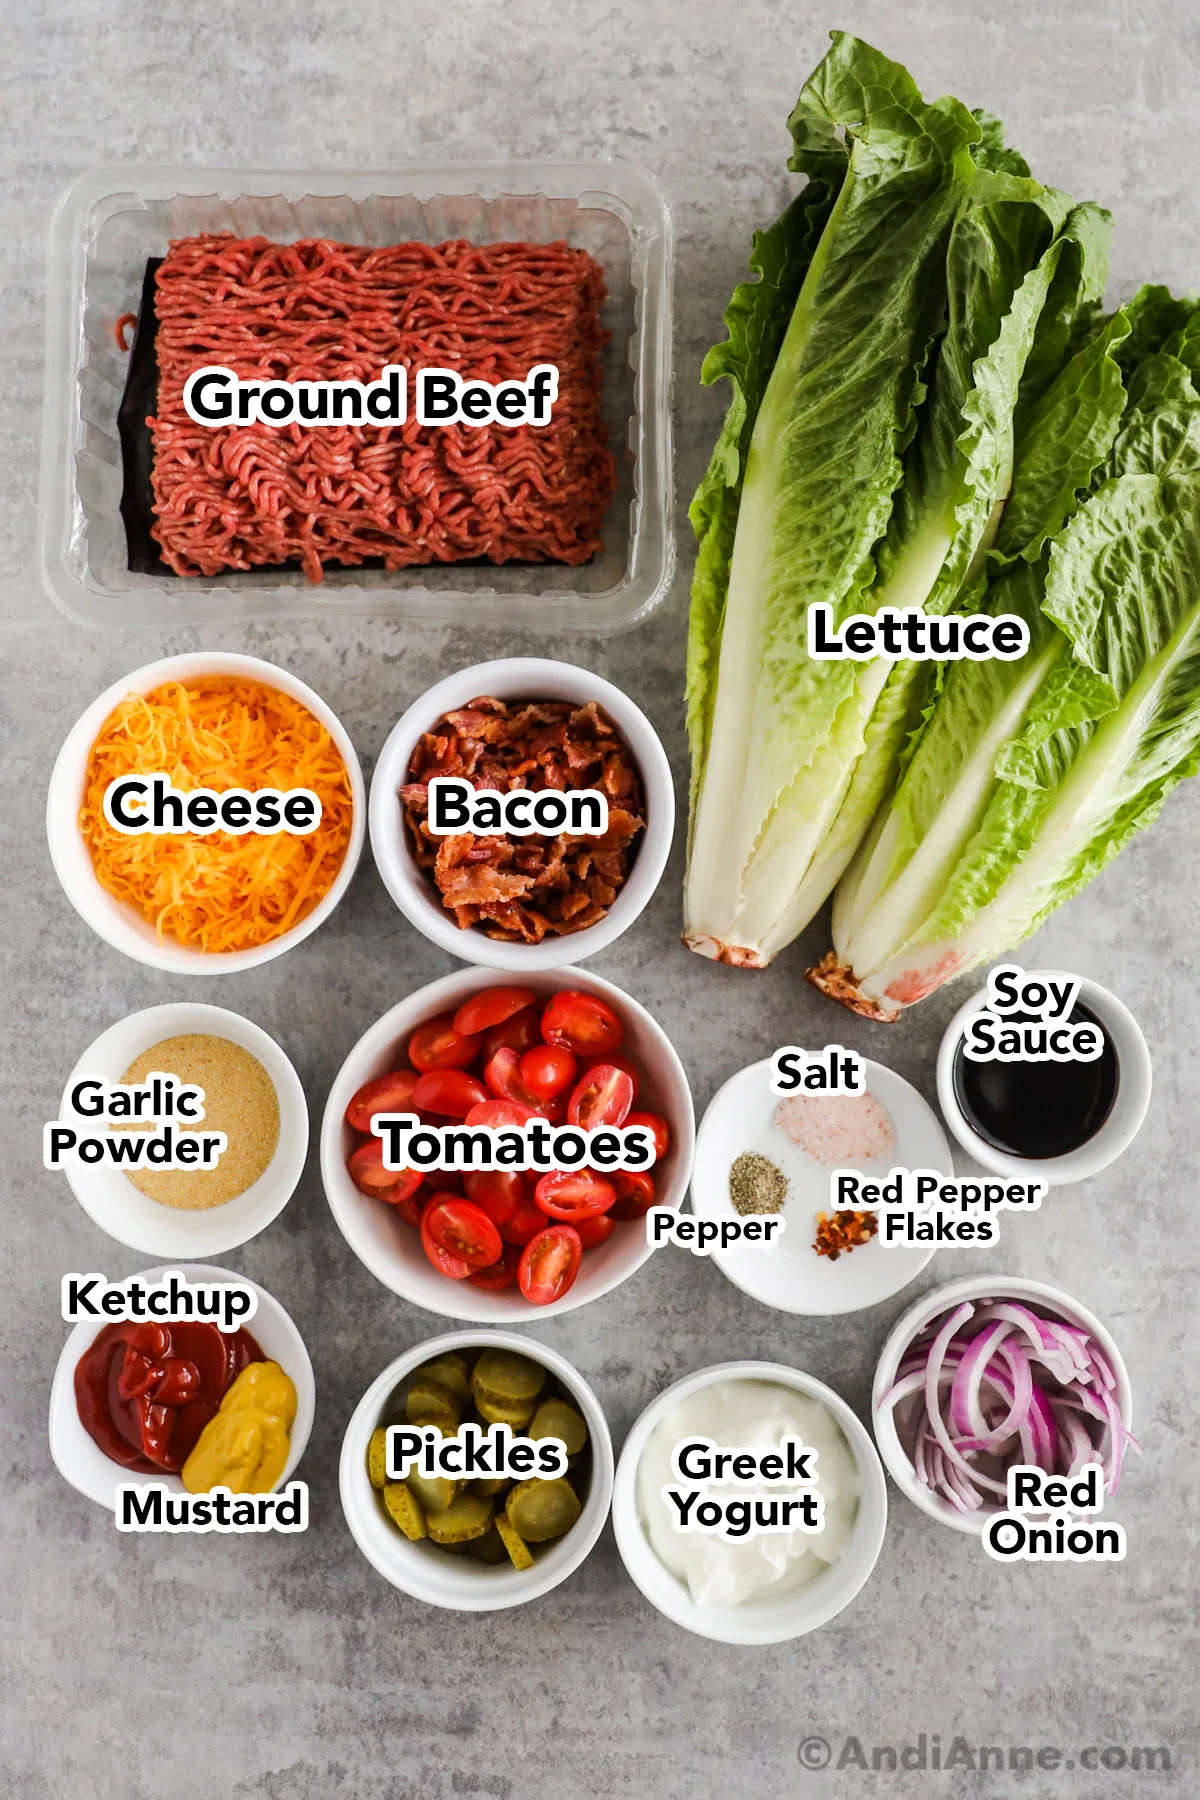 Recipe ingredients in bowls including cheese, bacon, tomatoes, greek yogurt, onions, pickles, spices, ground beef, romaine lettuce.